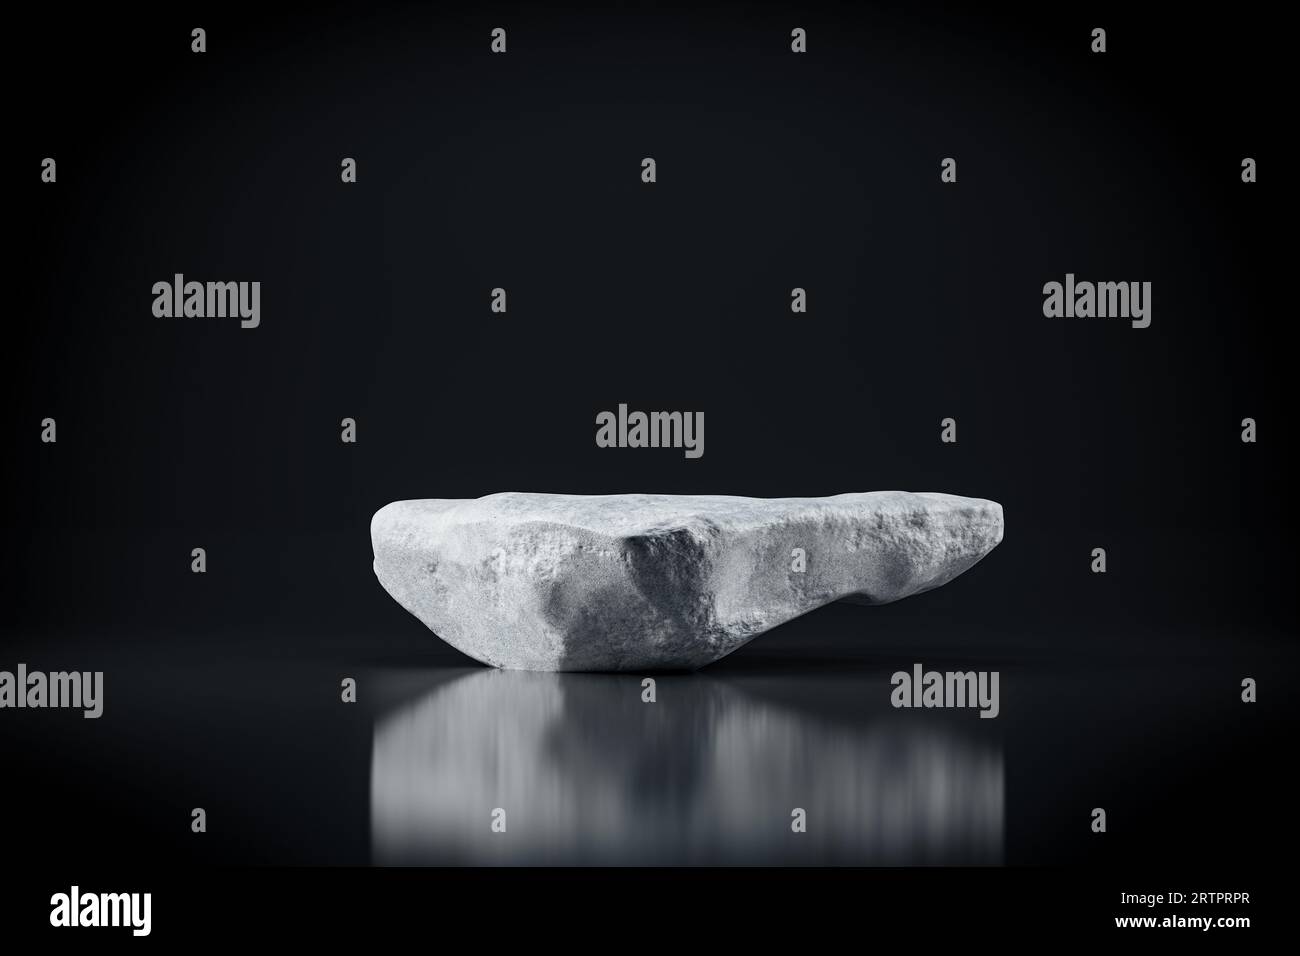 3d presentation pedestal made of natural white rock over black background. 3d rendering of mockup of presentation podium for display or advertising purposes Stock Photo